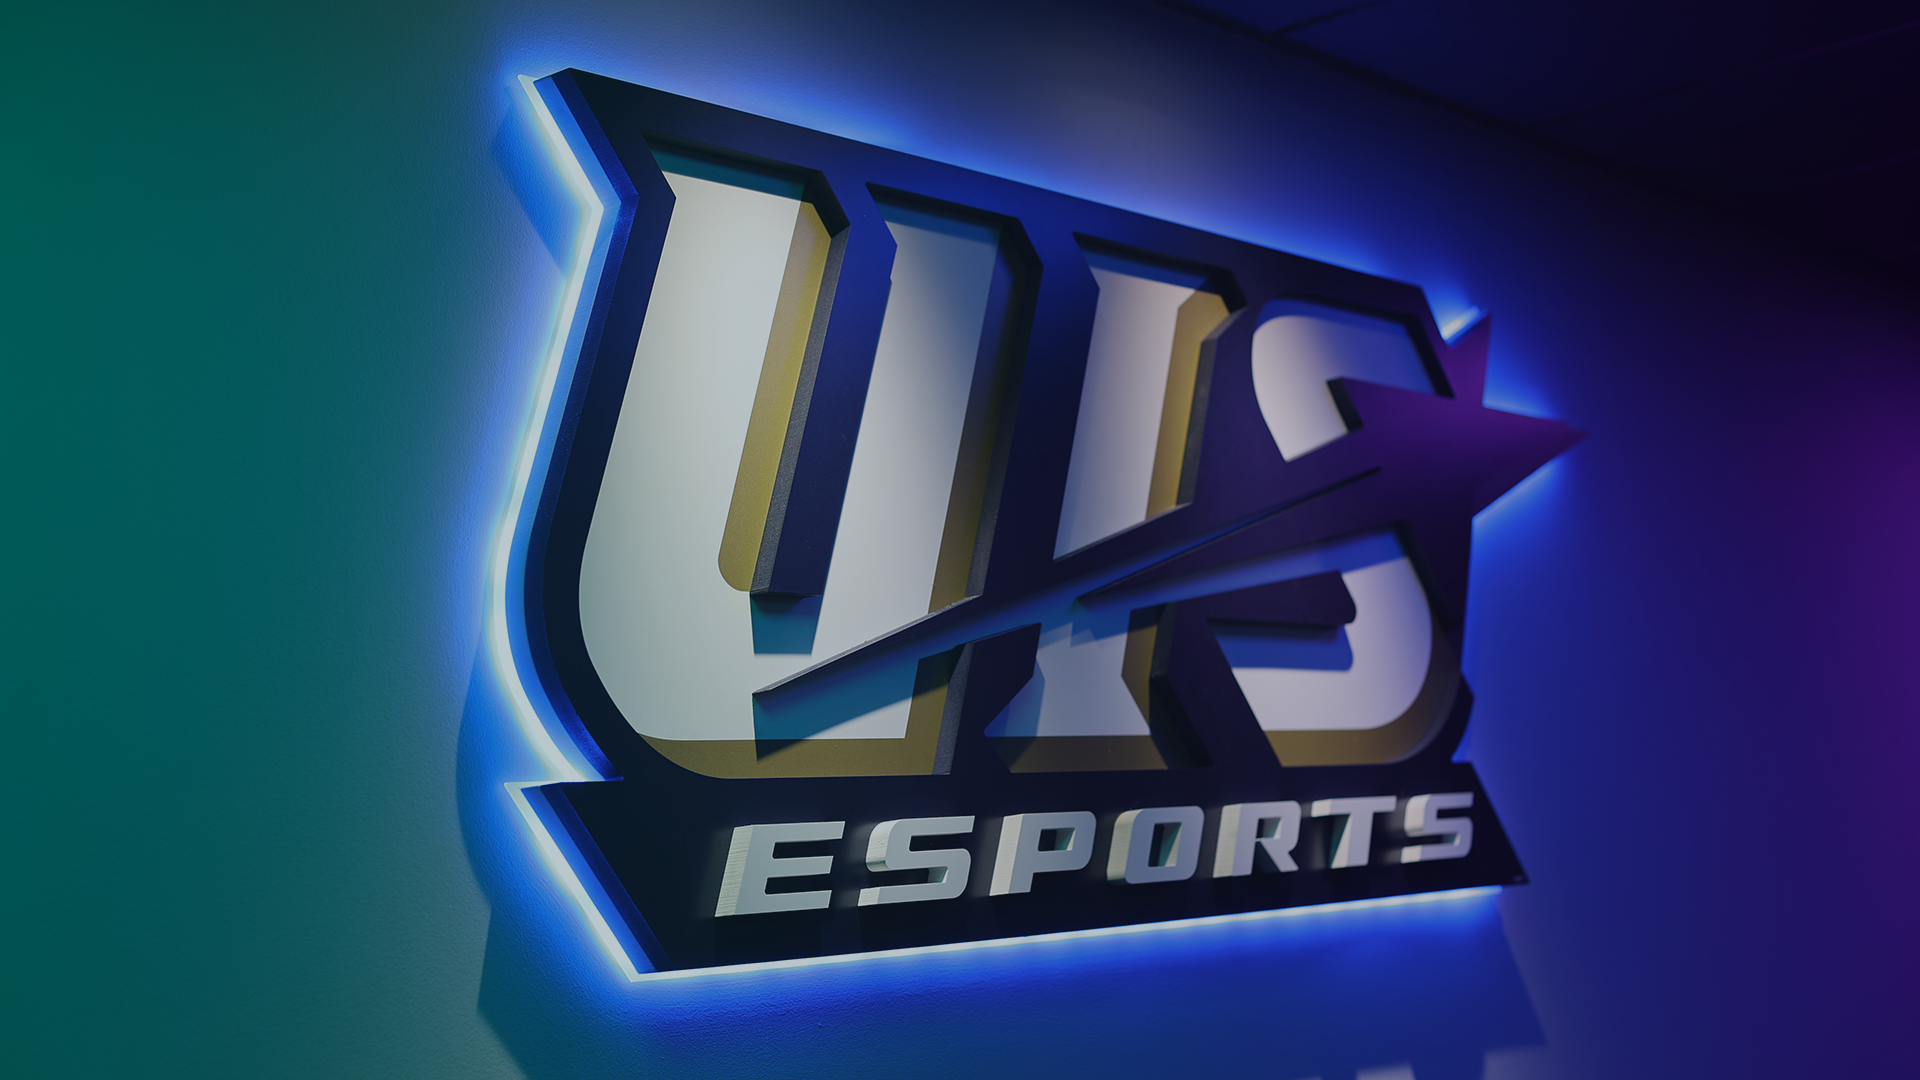 UIS ESports logo on the wall of the lab